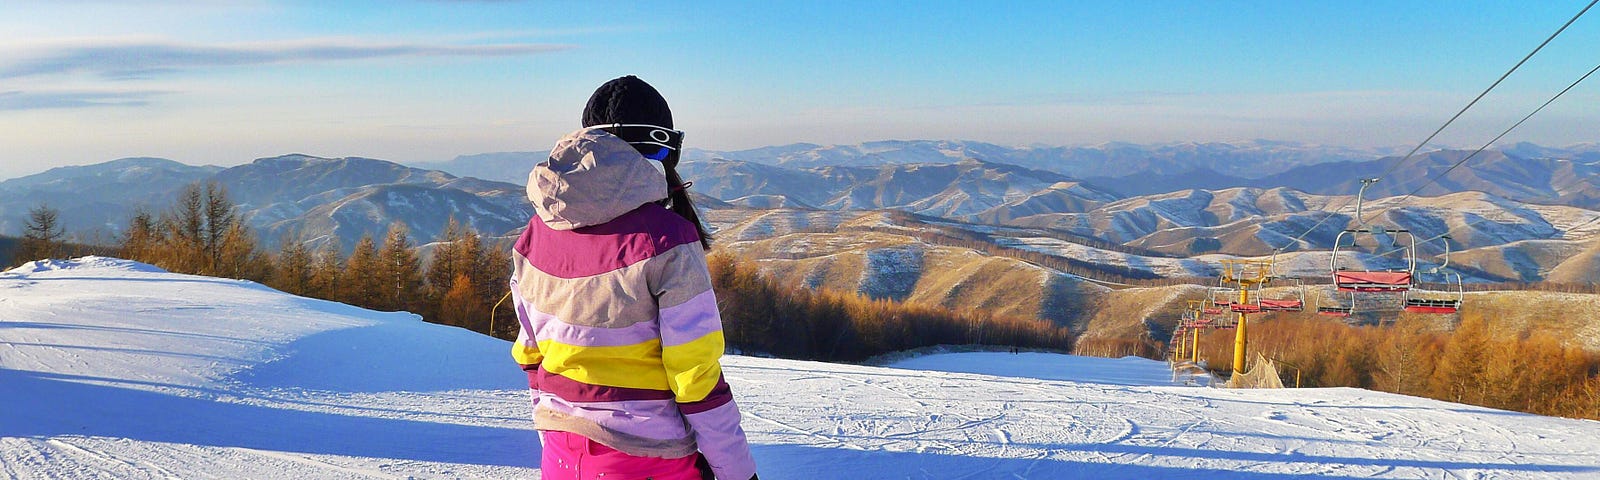 Woman in ski outfit and snowboard looking over ski slope and barren hills